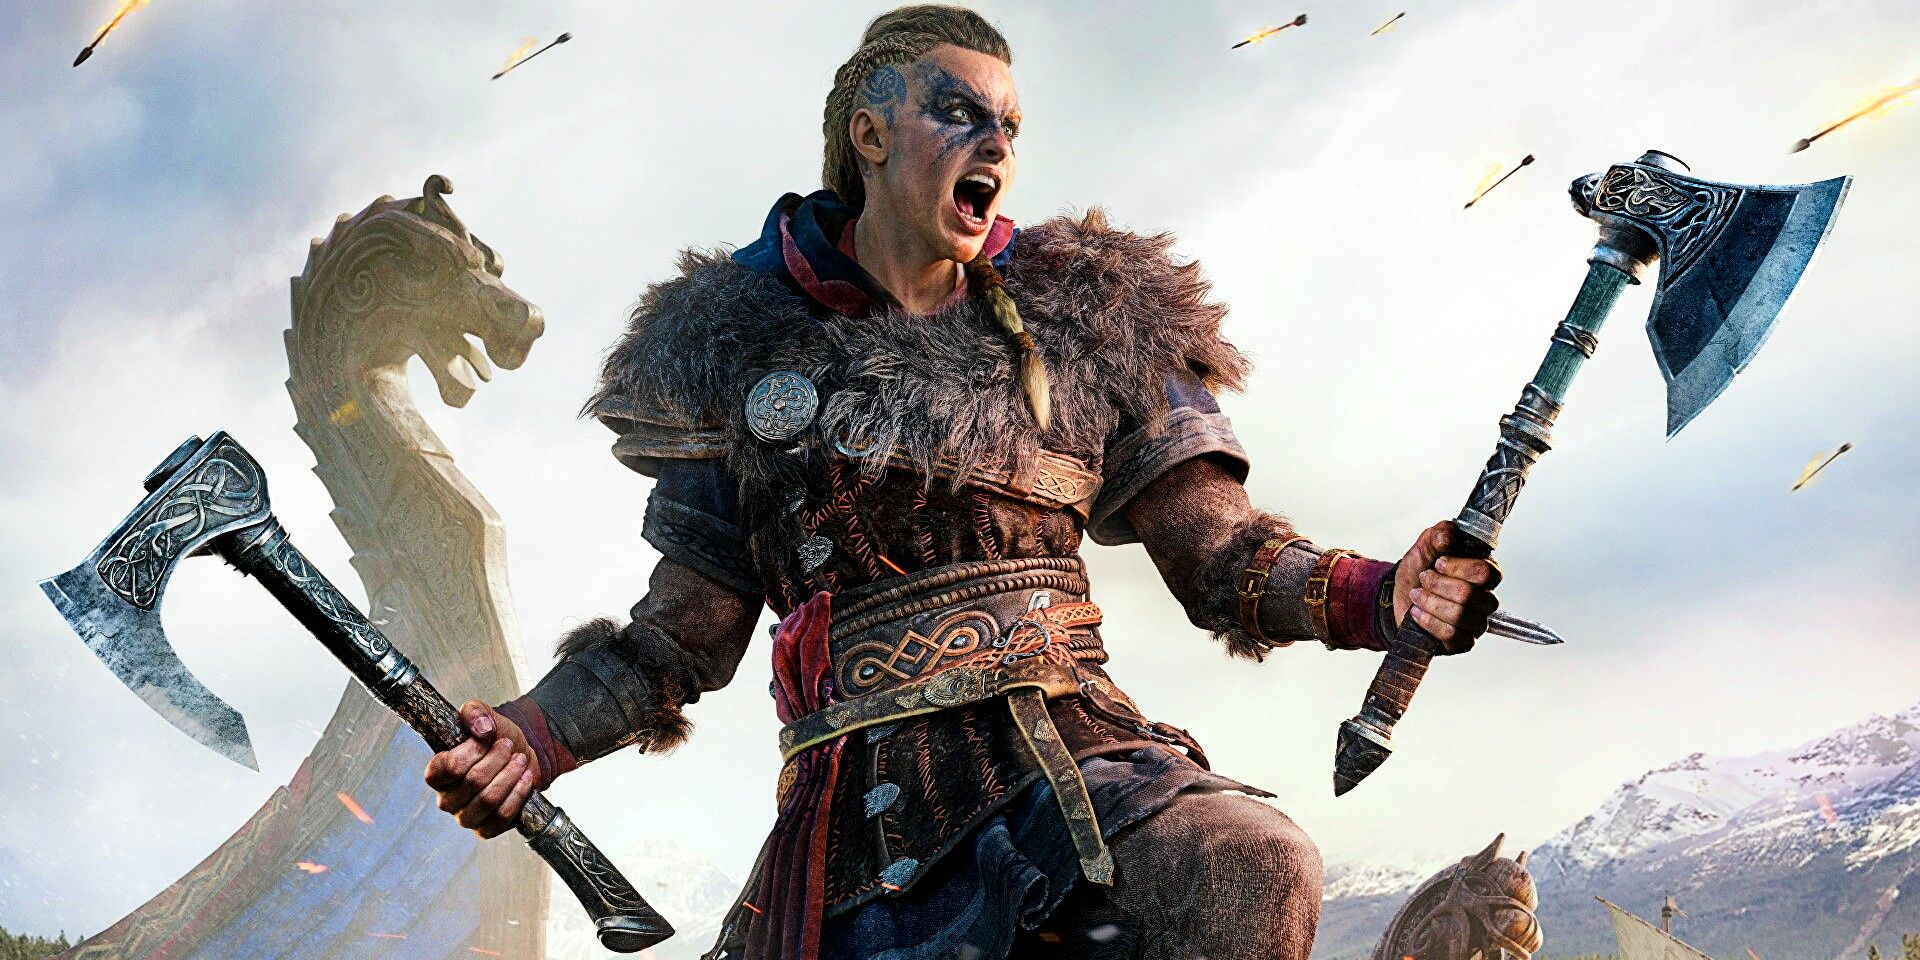 Promotional image depicting Evior's battle cry, as seen in Assassin's Creed Valhalla.